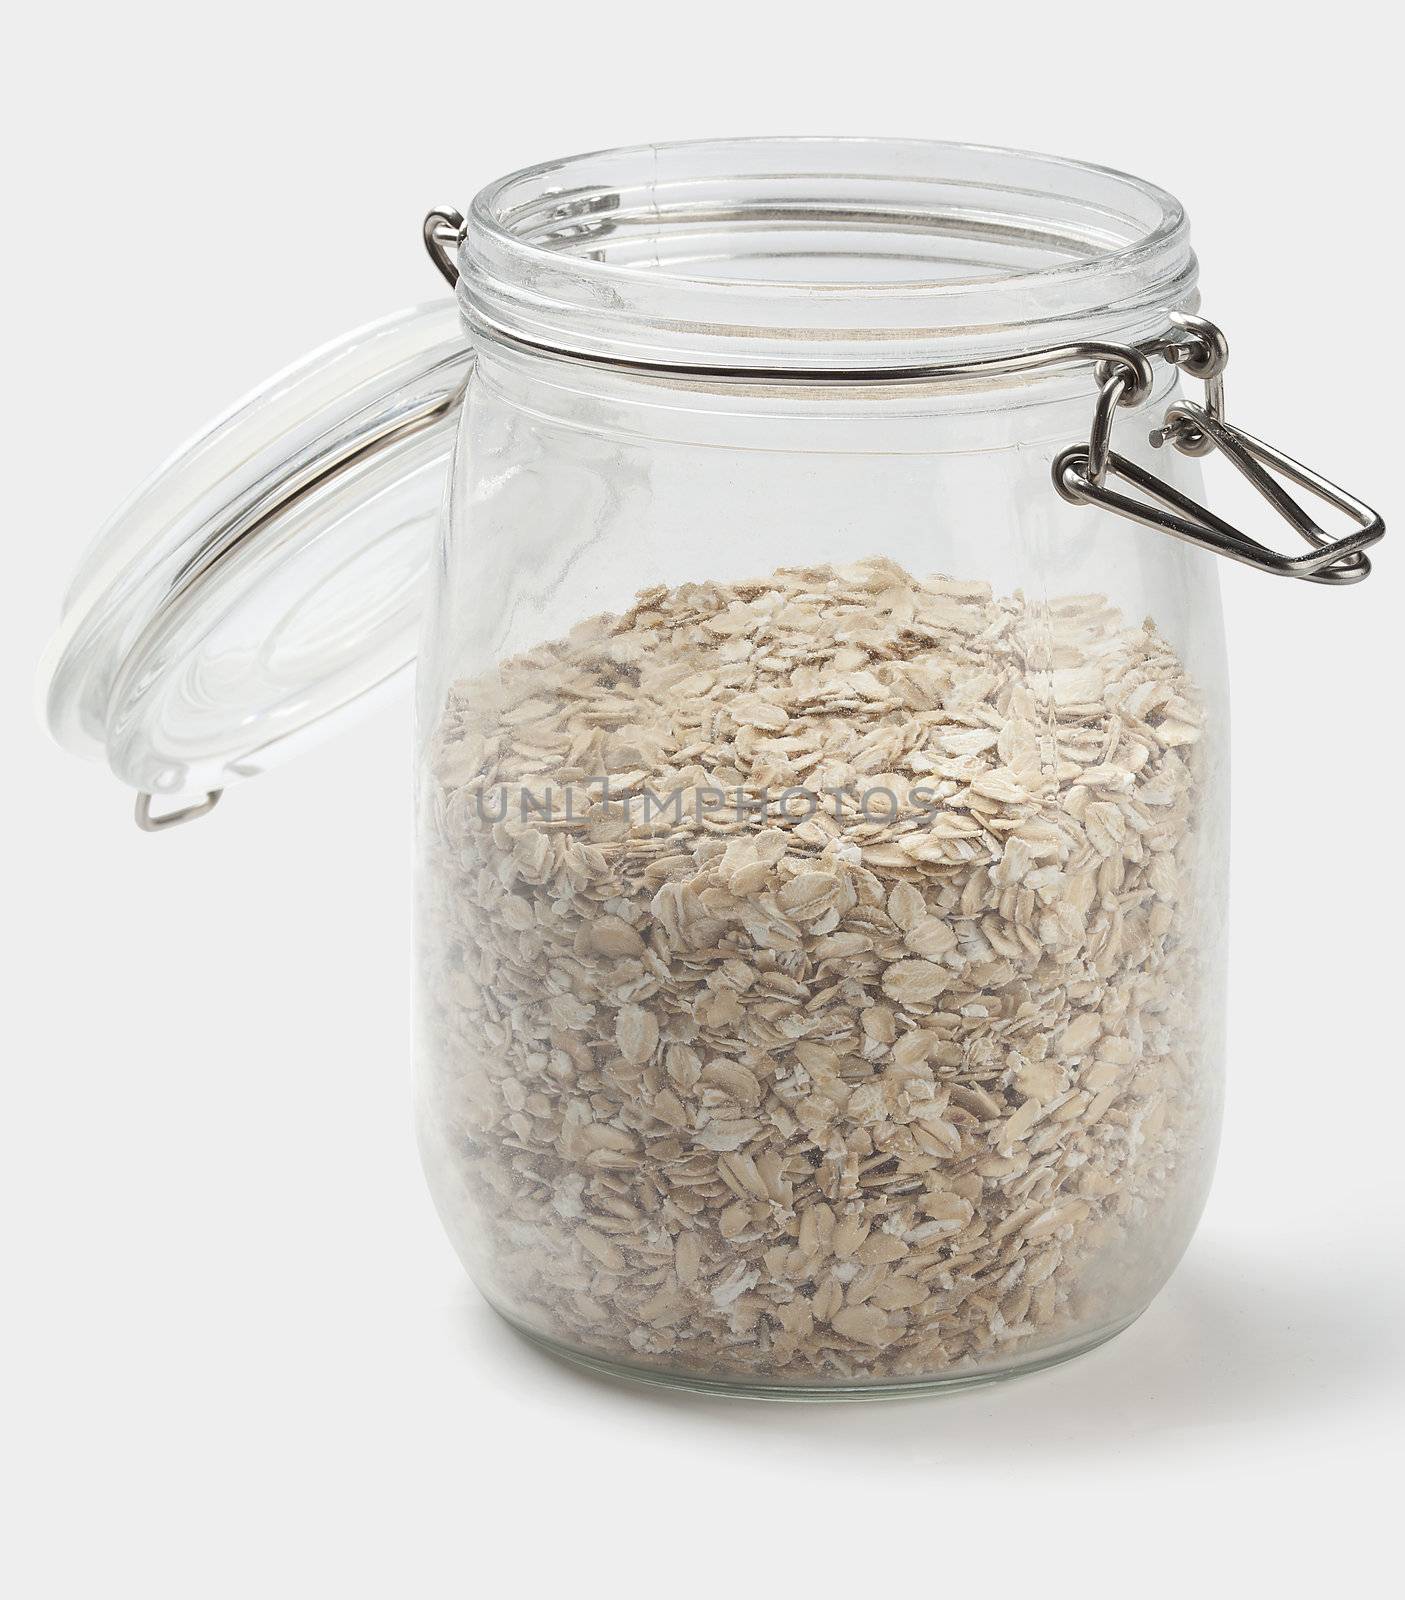 Oat flakes in the opened transparent jar on the white background